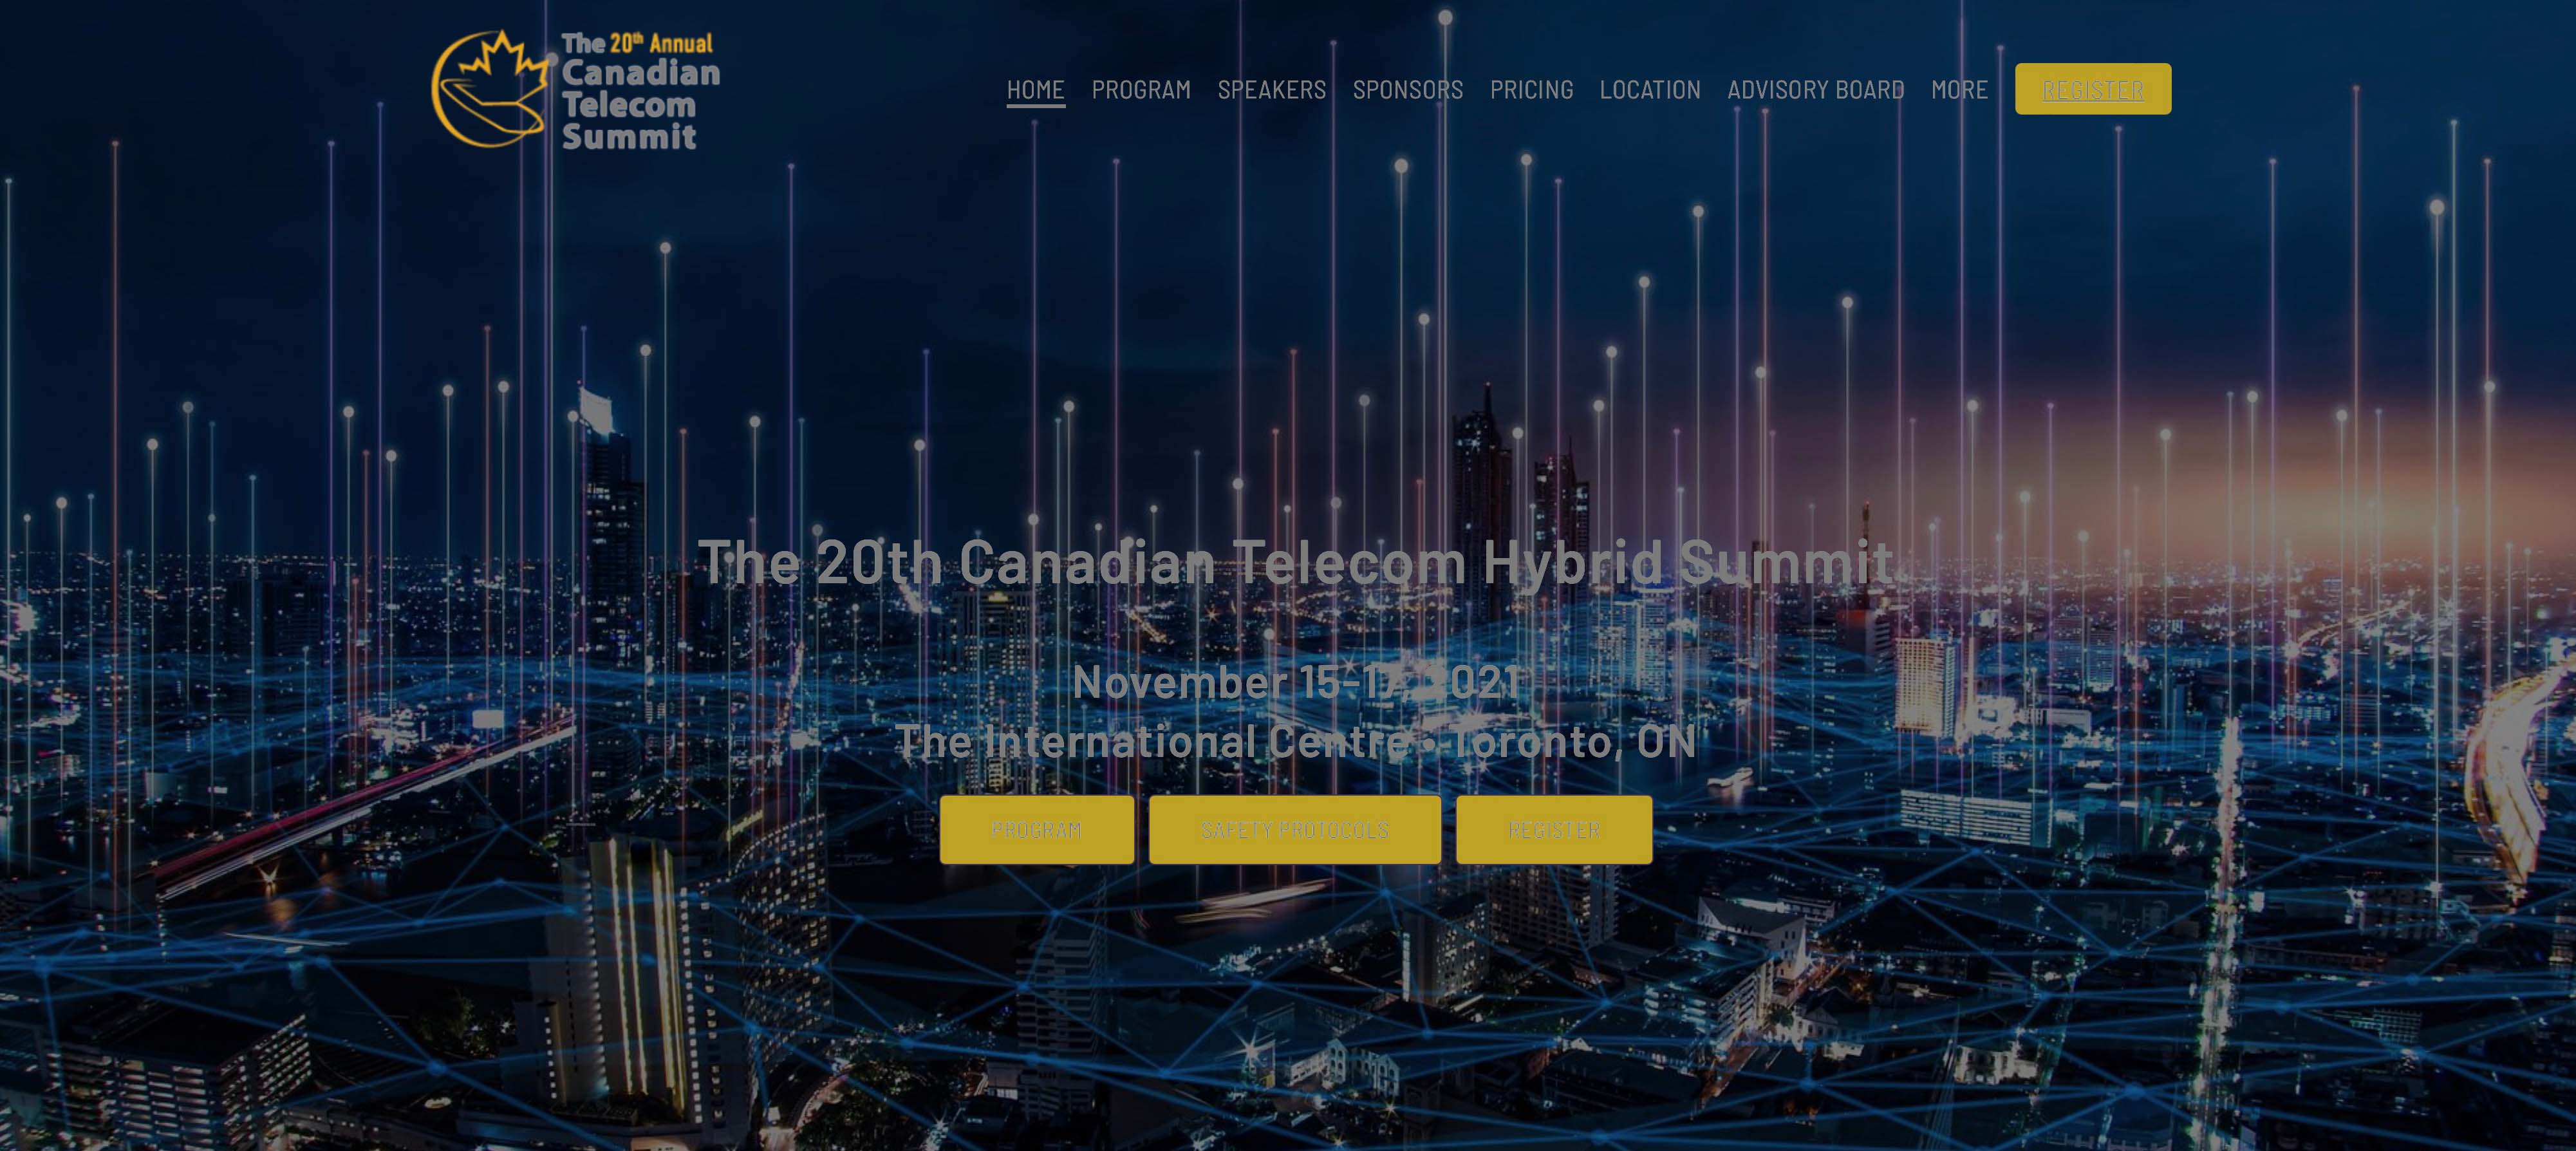 ebpSource at the Canadian Telecom Summit 2021